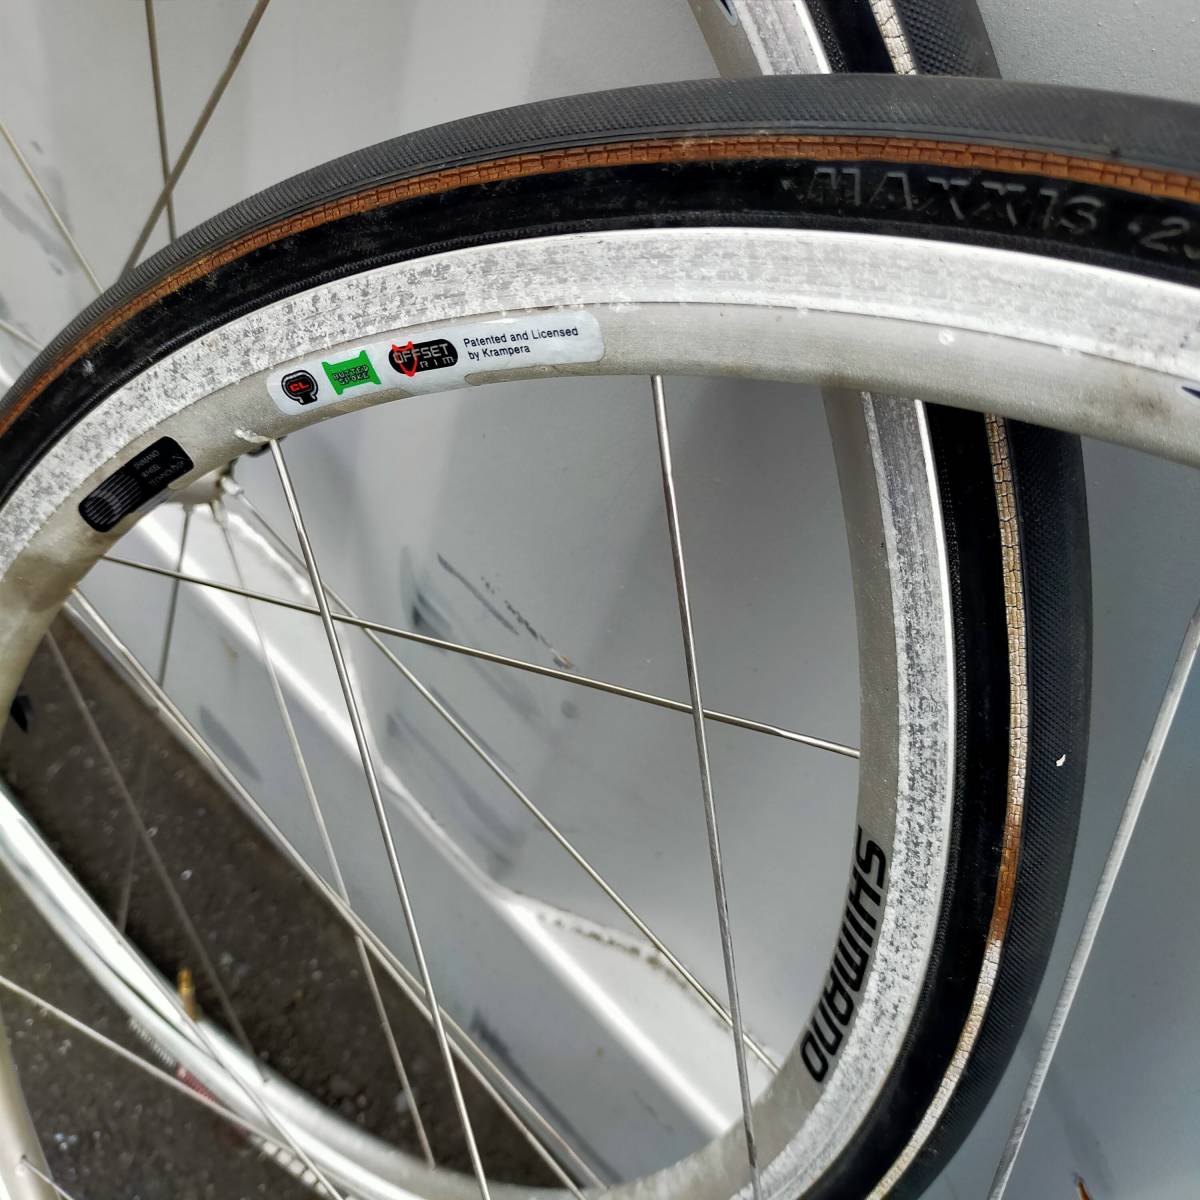 SHIMANO シマノ WH-R561 ALEXRIMS アレックスリム AT450 セット(27